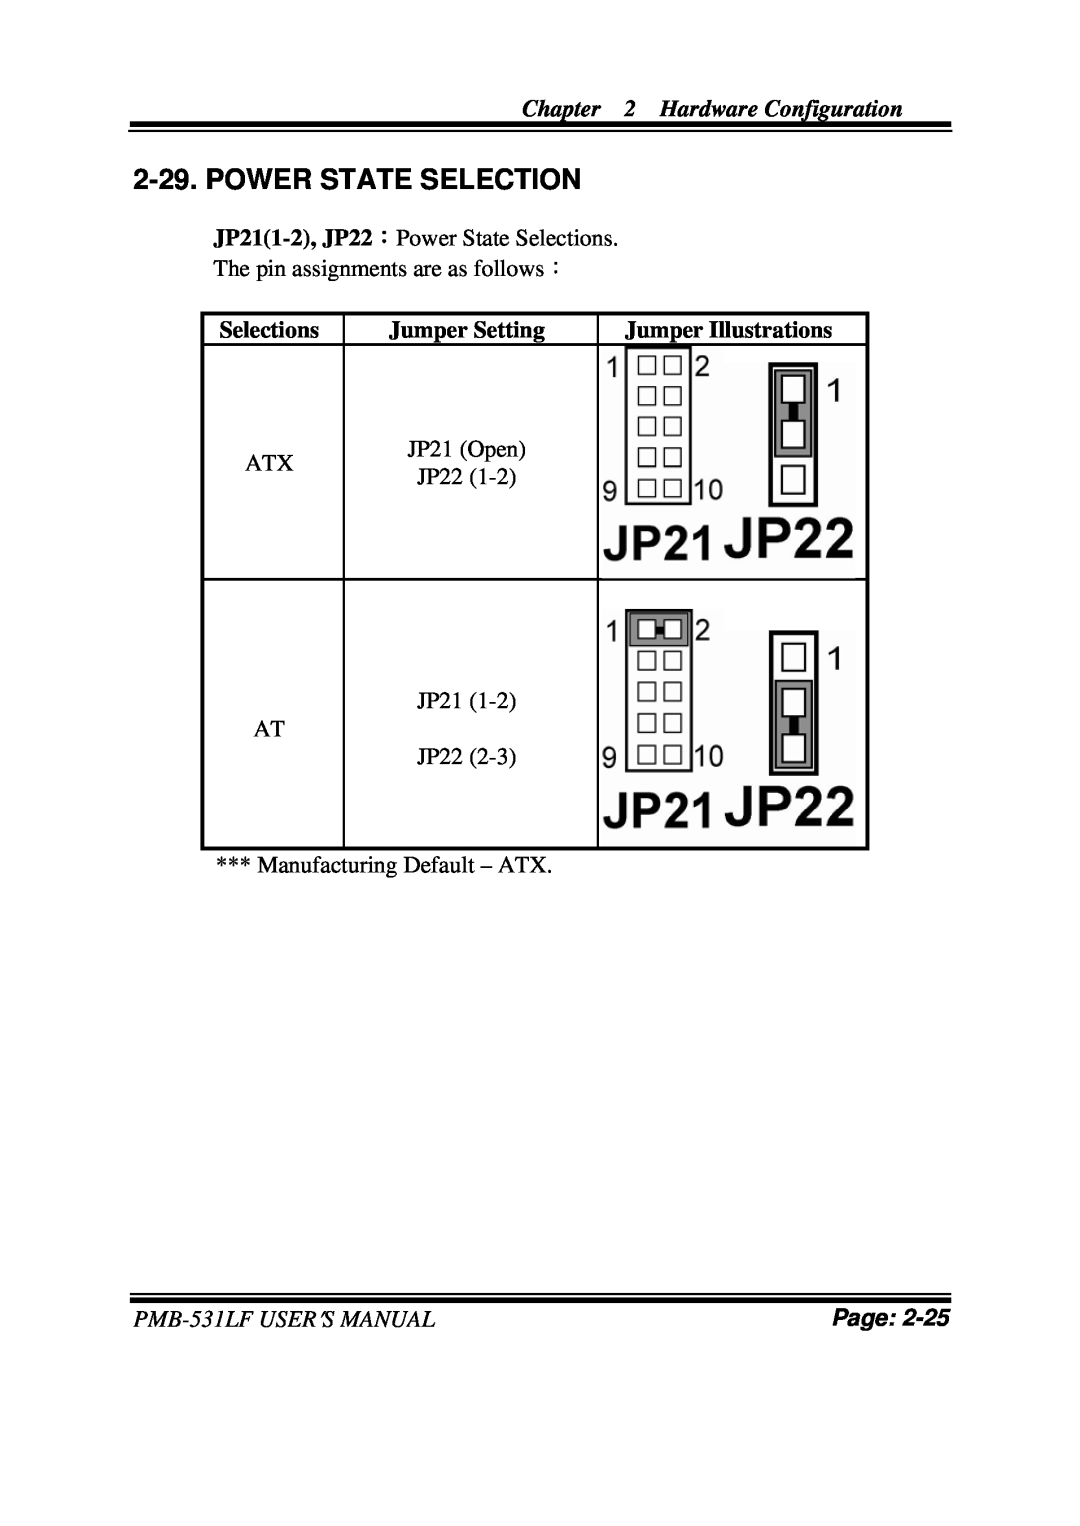 Intel PMB-531LF Power State Selection, Selections, Jumper Setting, Jumper Illustrations, Hardware Configuration, Page 